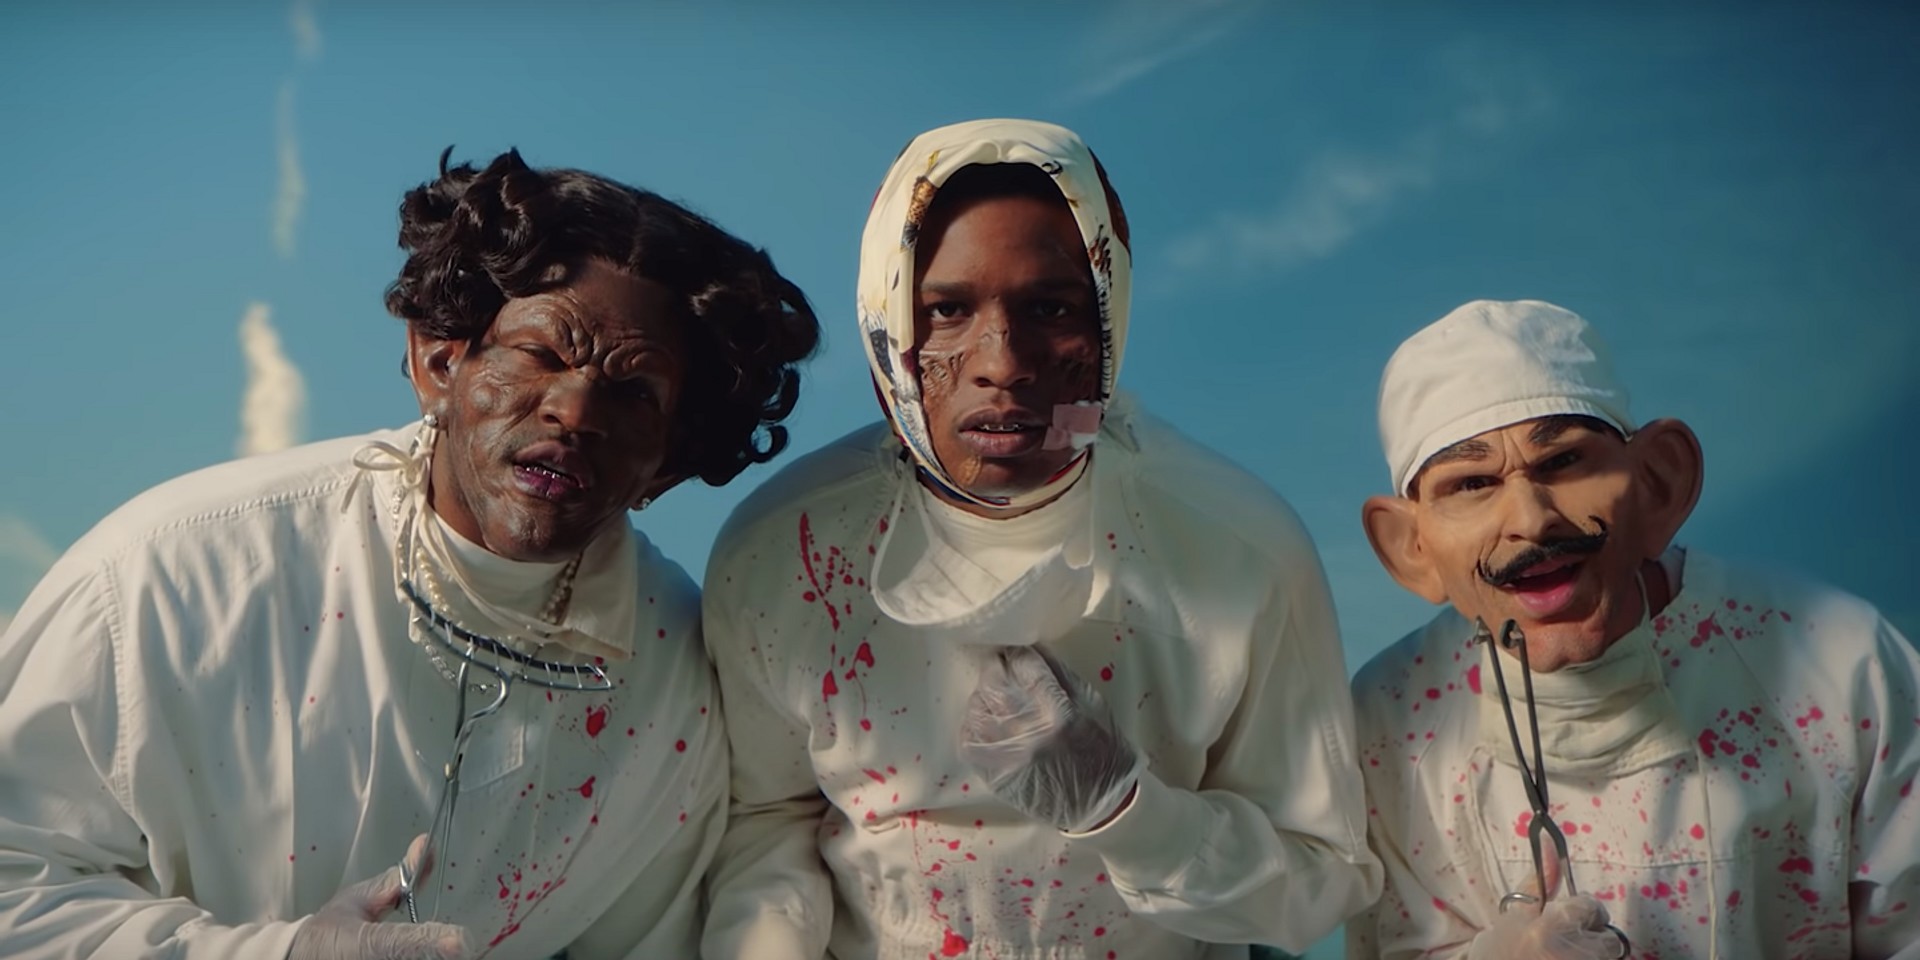 A$AP Rocky releases comedic music video for new song, 'Babushka Boi' – watch 